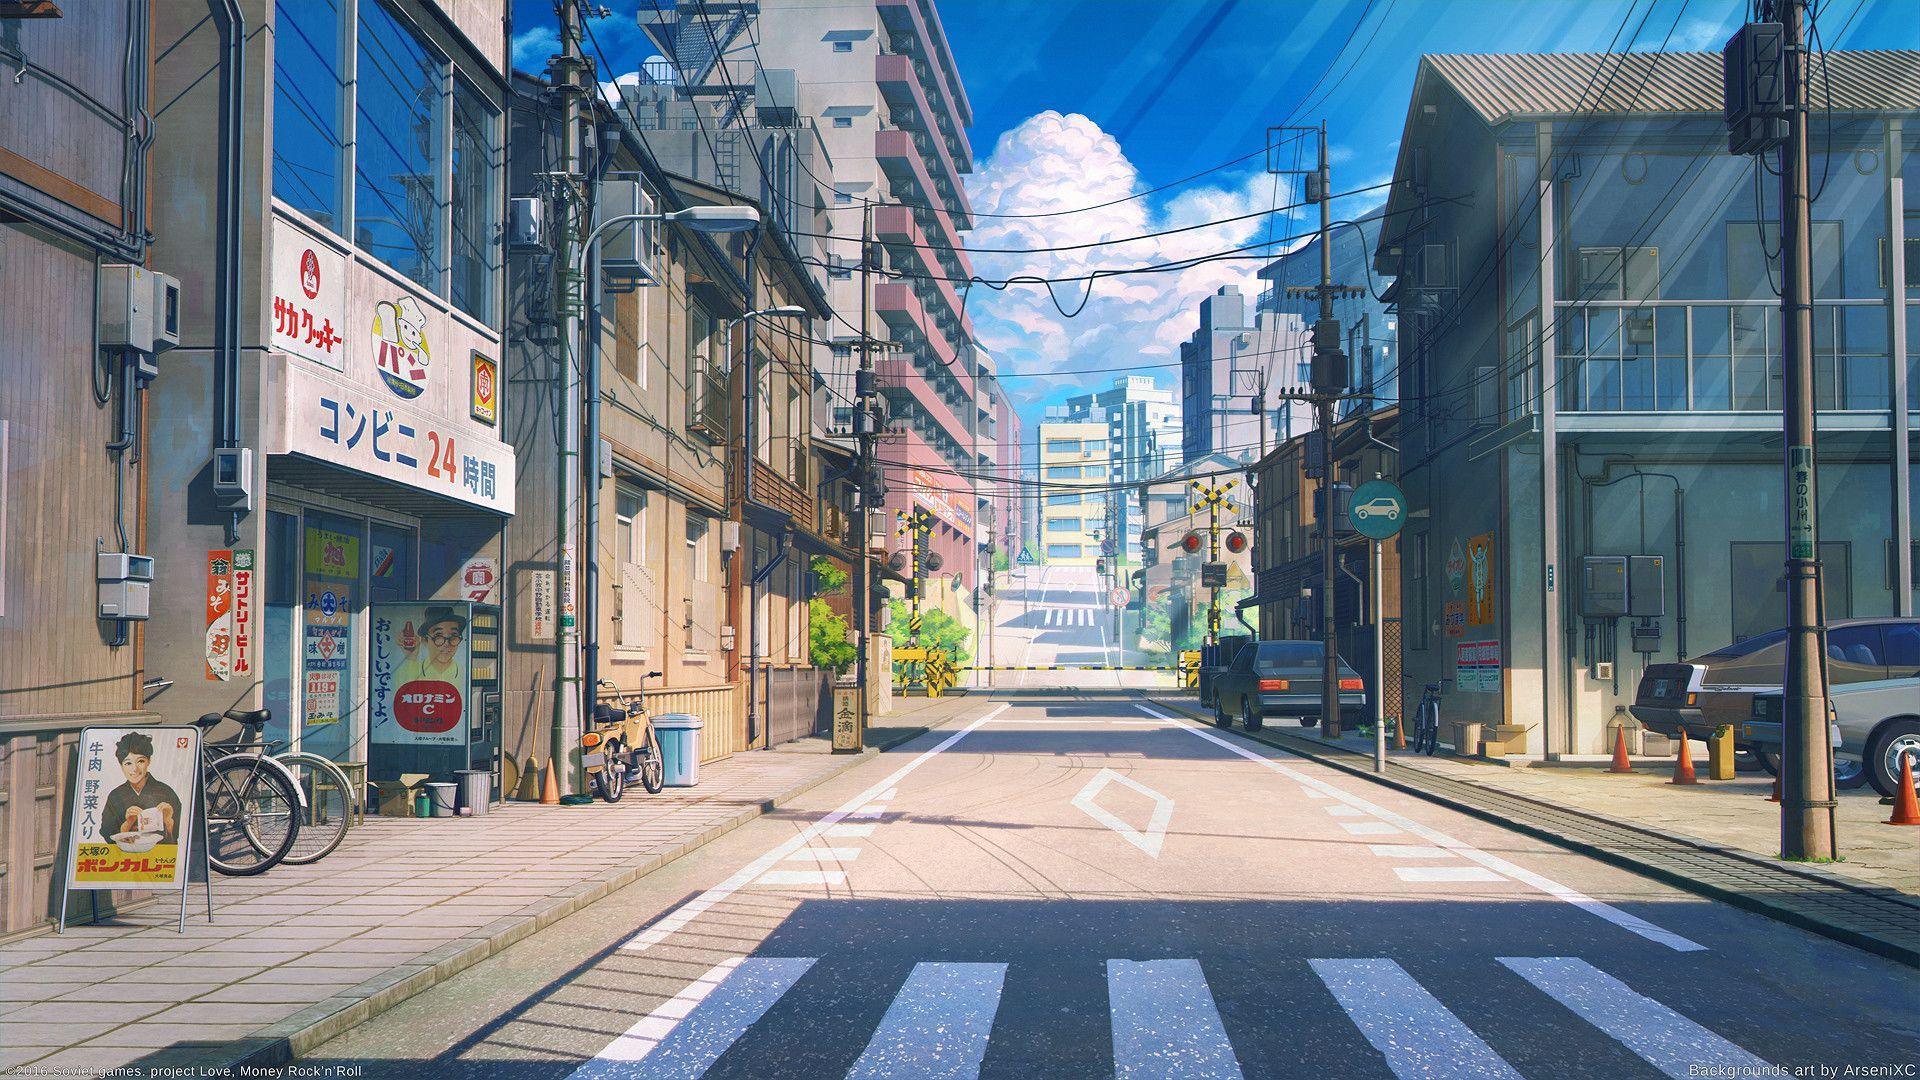 Arseniy Chebynkin is a freelance artist from Russia. If you're wondering what the street. Anime scenery wallpaper, Anime background wallpaper, Anime scenery